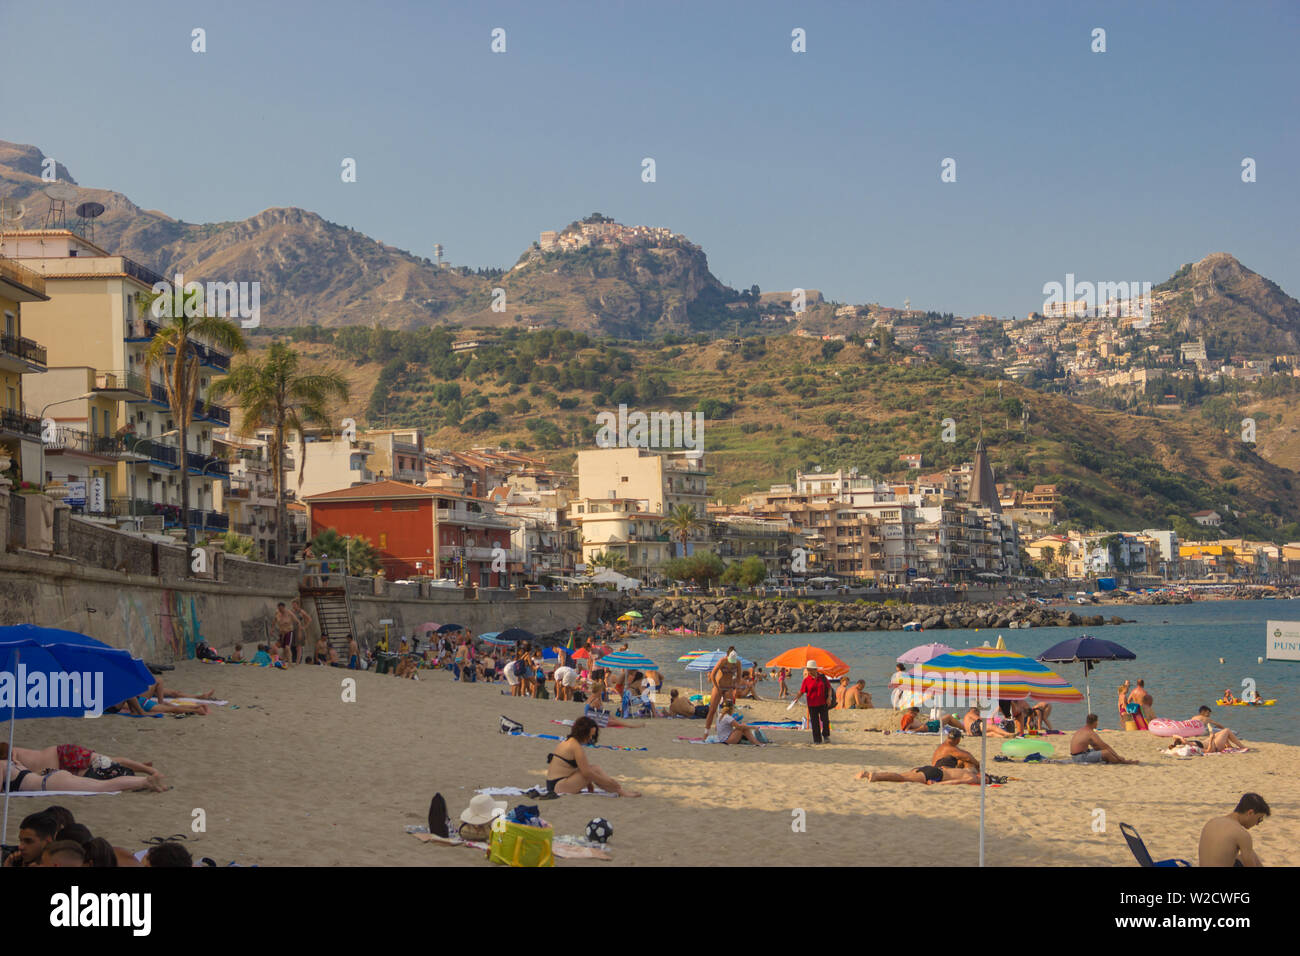 Giardini Naxos Sicily Italy 2019 close up view of the beach life in Summer and buildings of the town along the coast Stock Photo